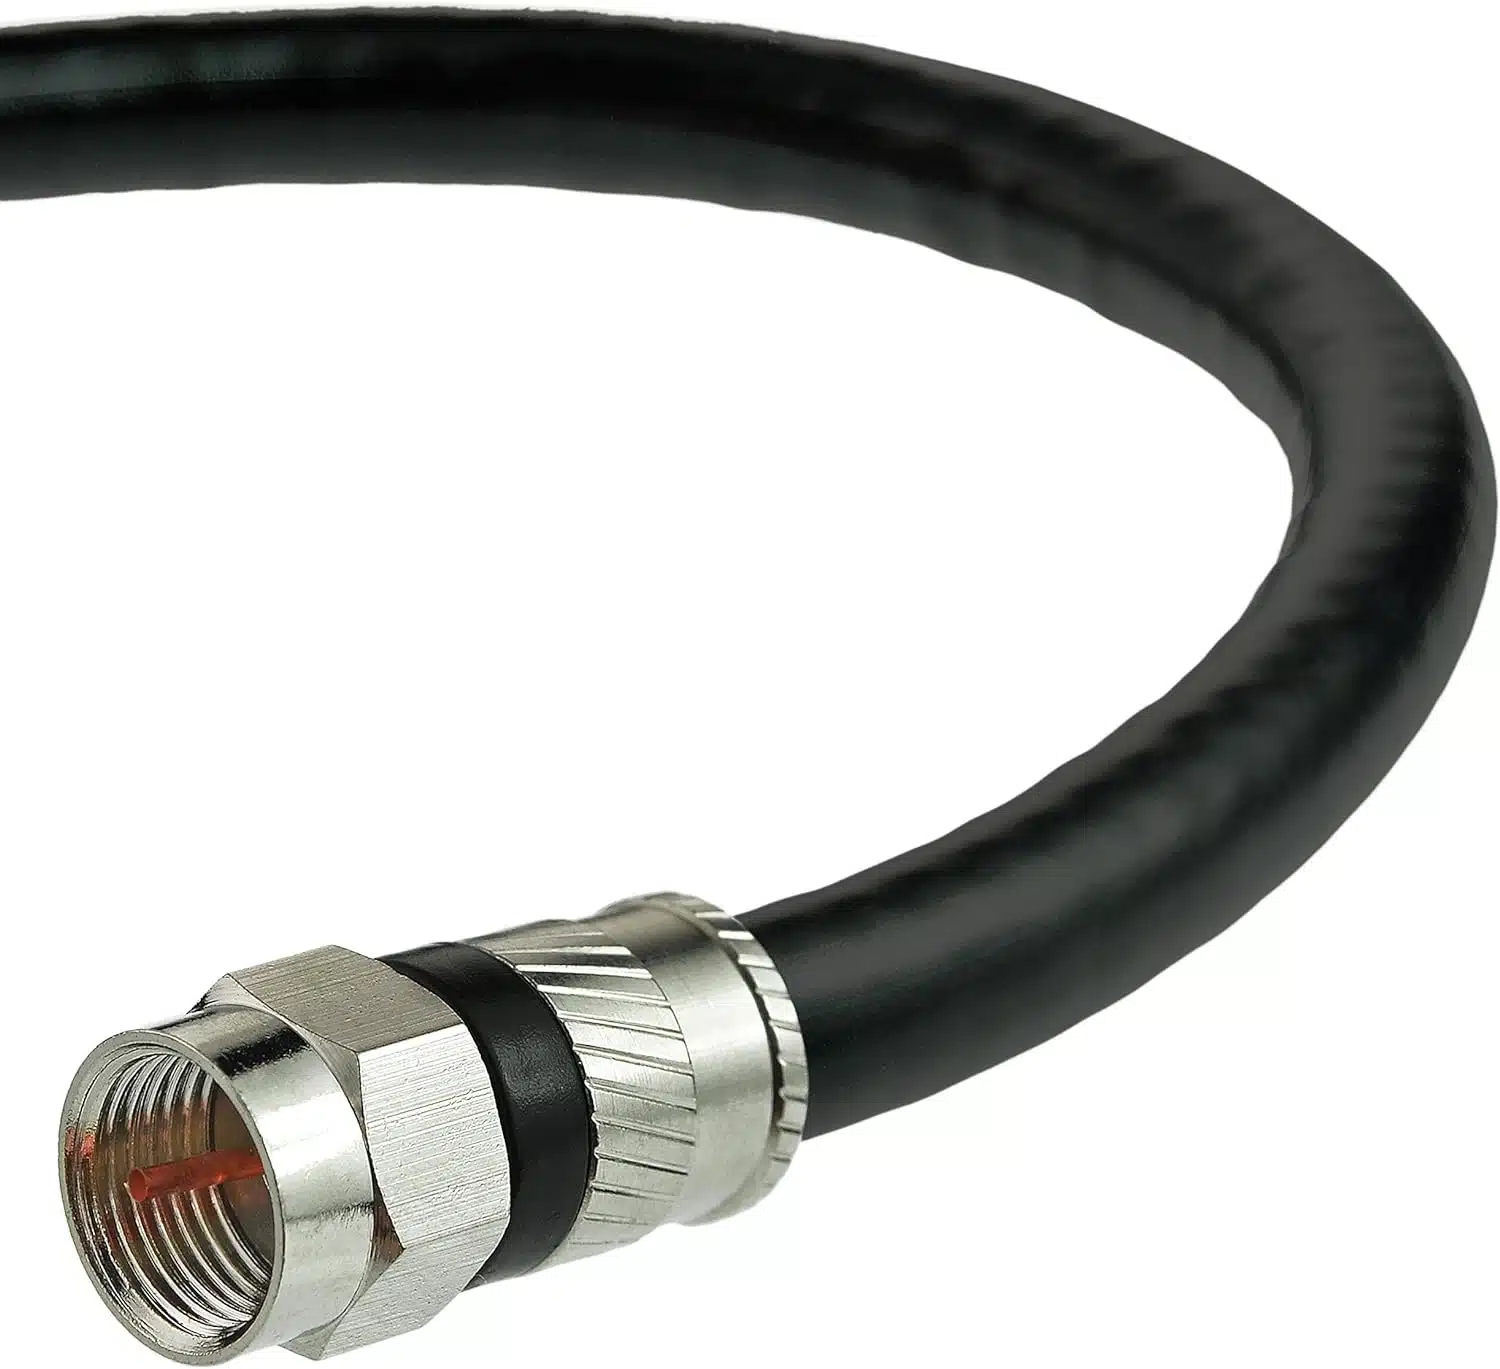 Mediabridge Coaxial Cable (50 Feet) with F-Male Connectors